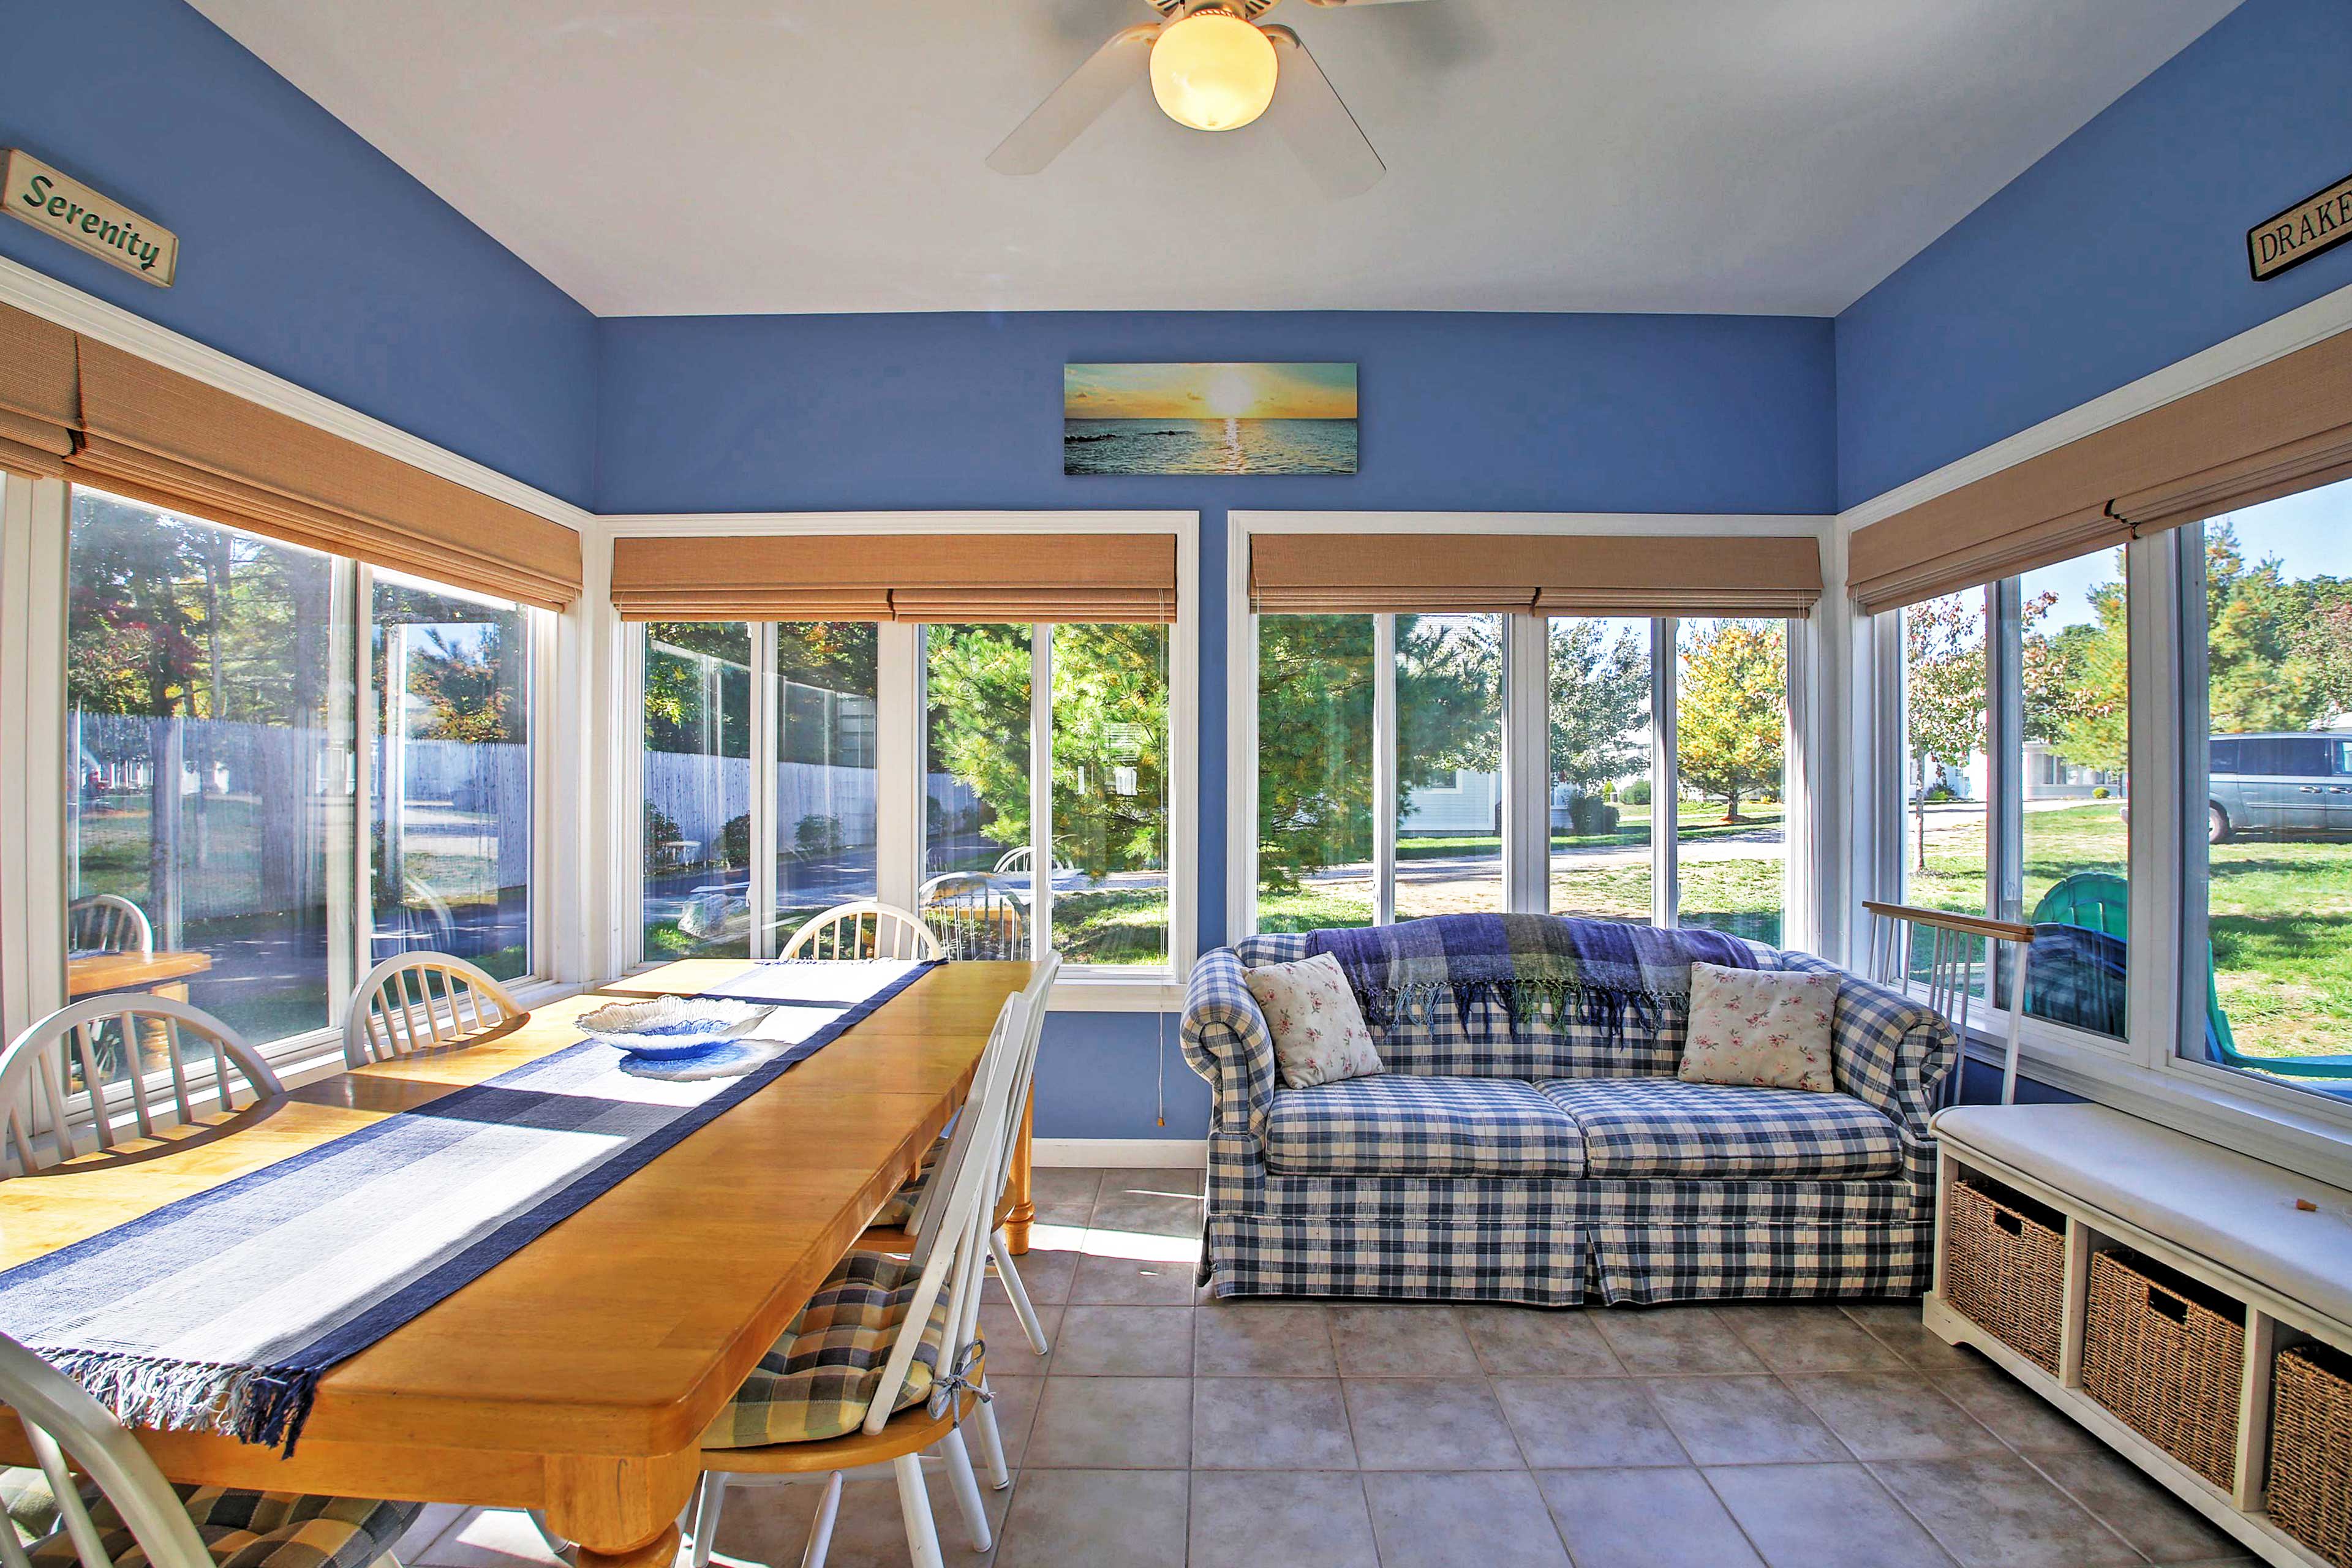 Enjoy home cooked meals in the bright & airy sun room.